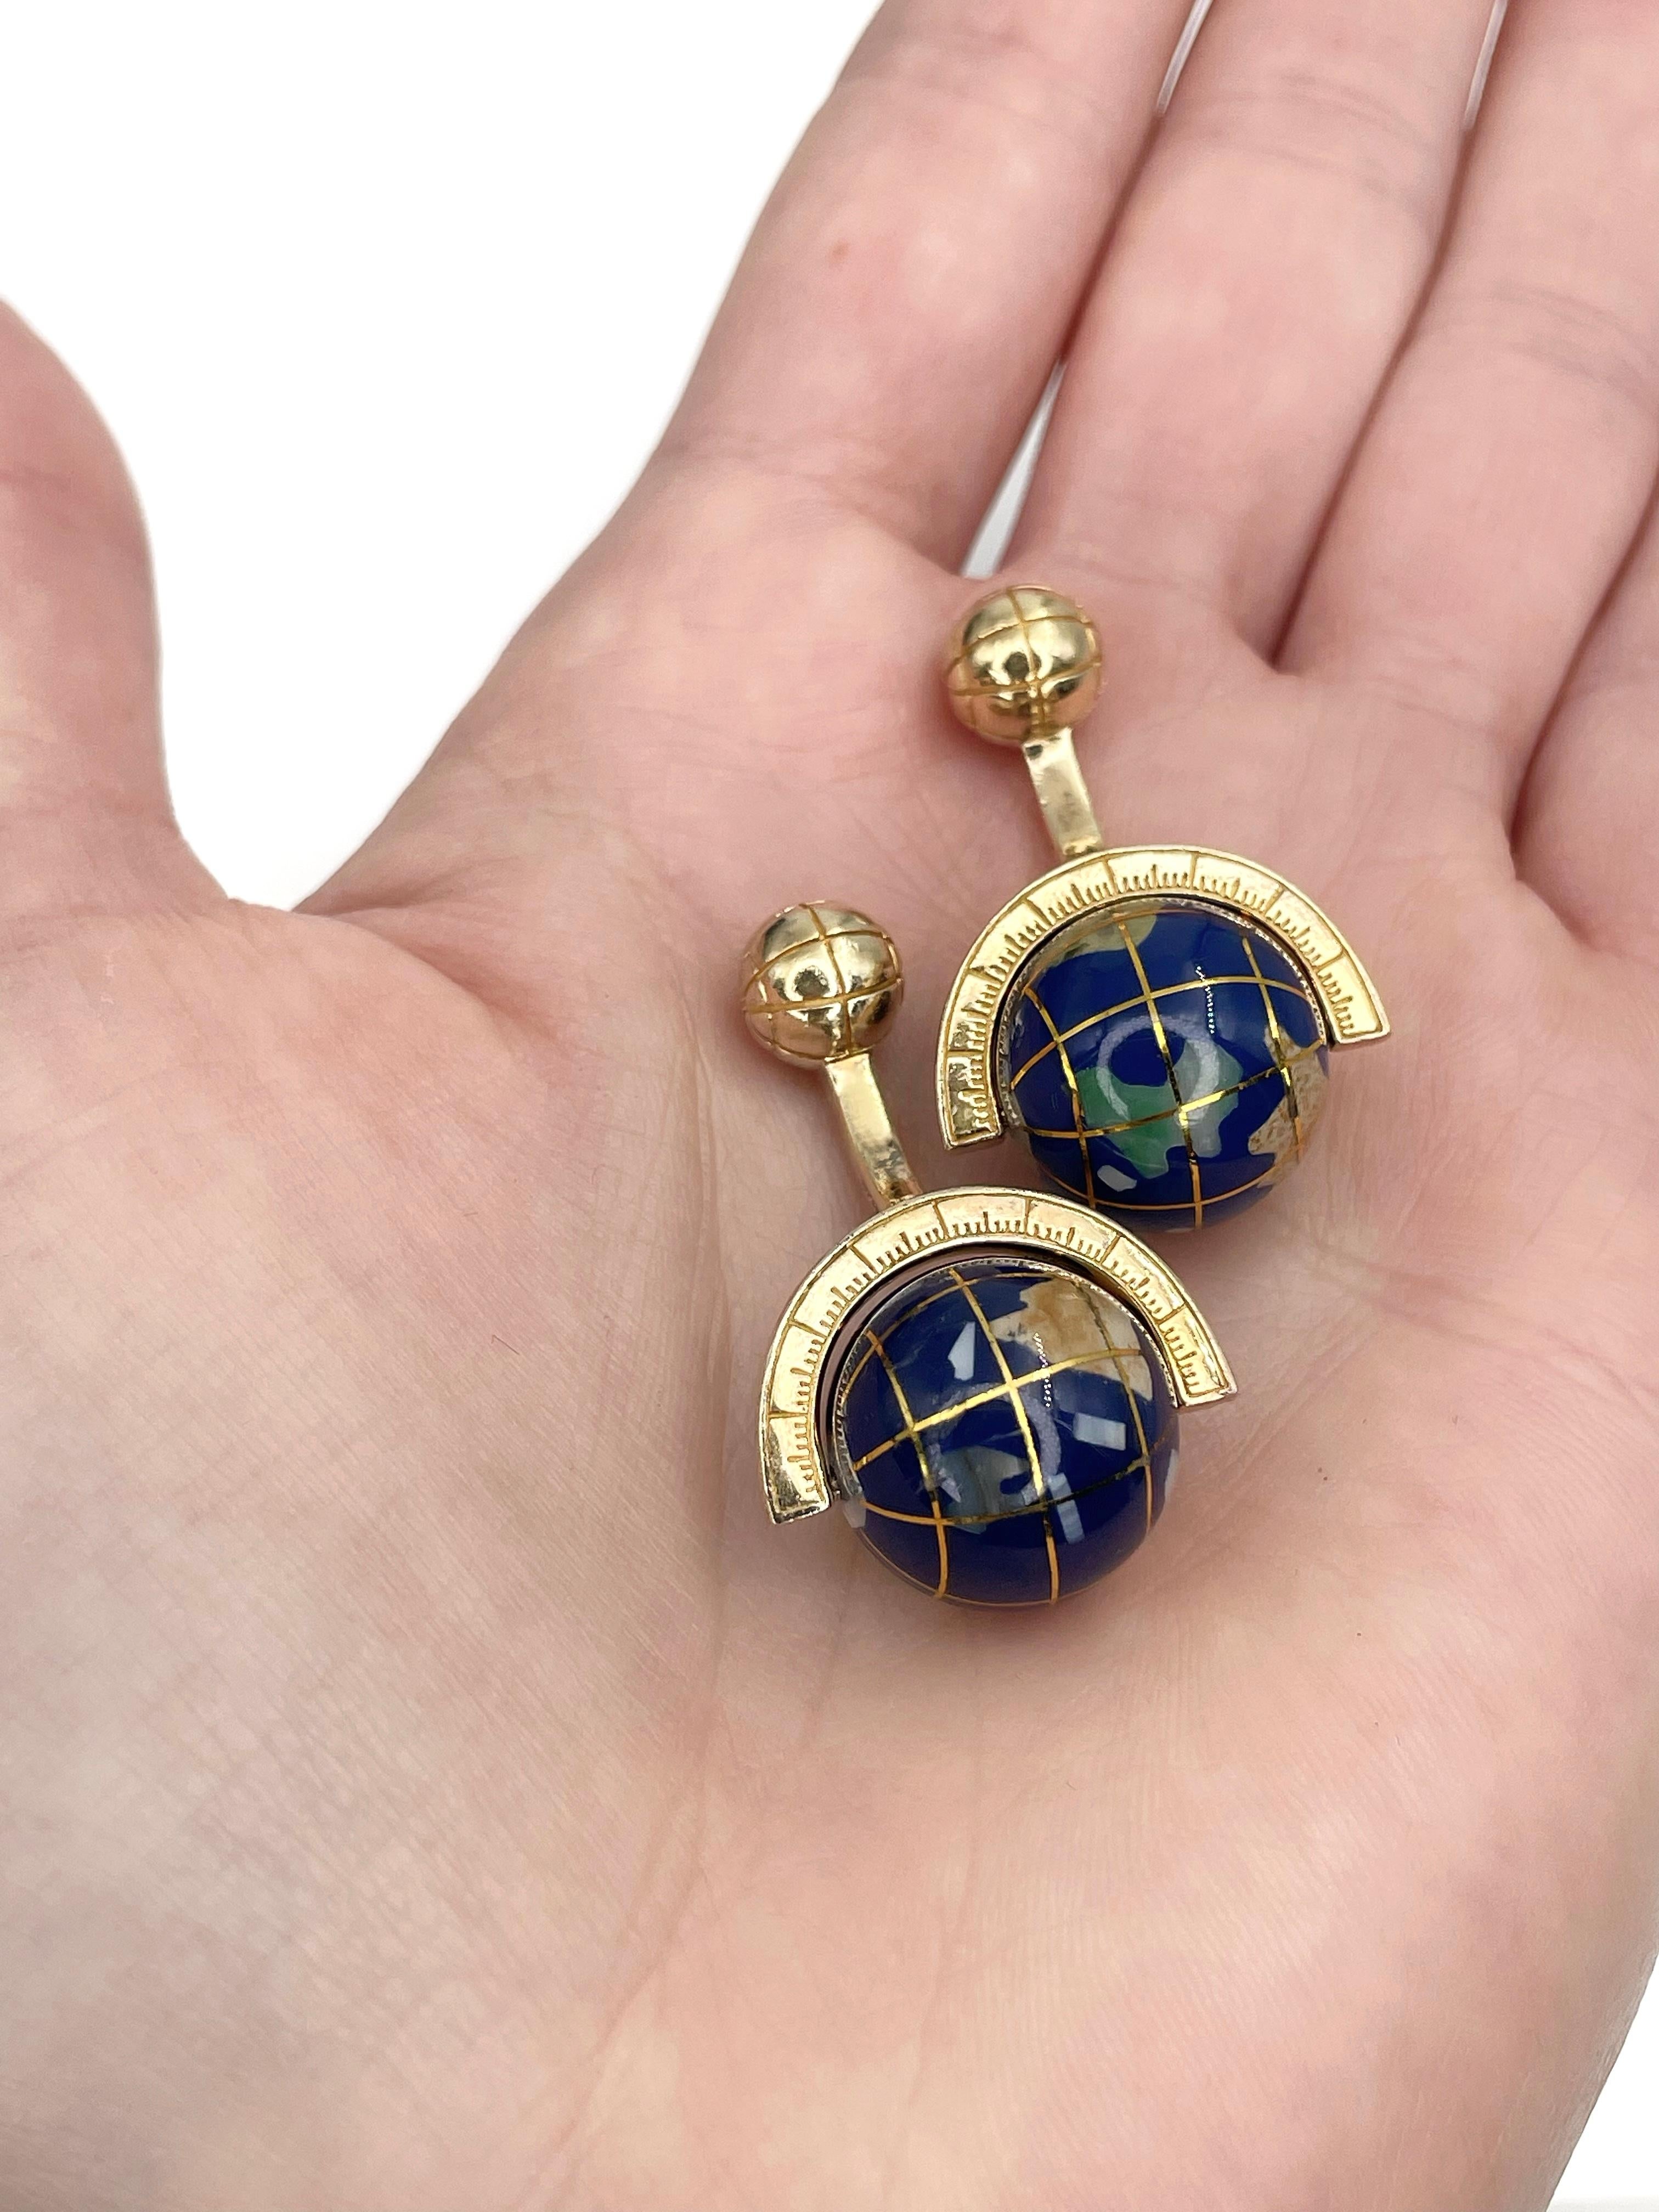 This is a playful pair of globe cufflinks designed by Tateossian in 2000’s. The piece is crafted in 925 silver and is gold plated. Spinning world spheres are made up of complex mosaic with blue lapis lazuli inlayed with semi-precious stone.

This